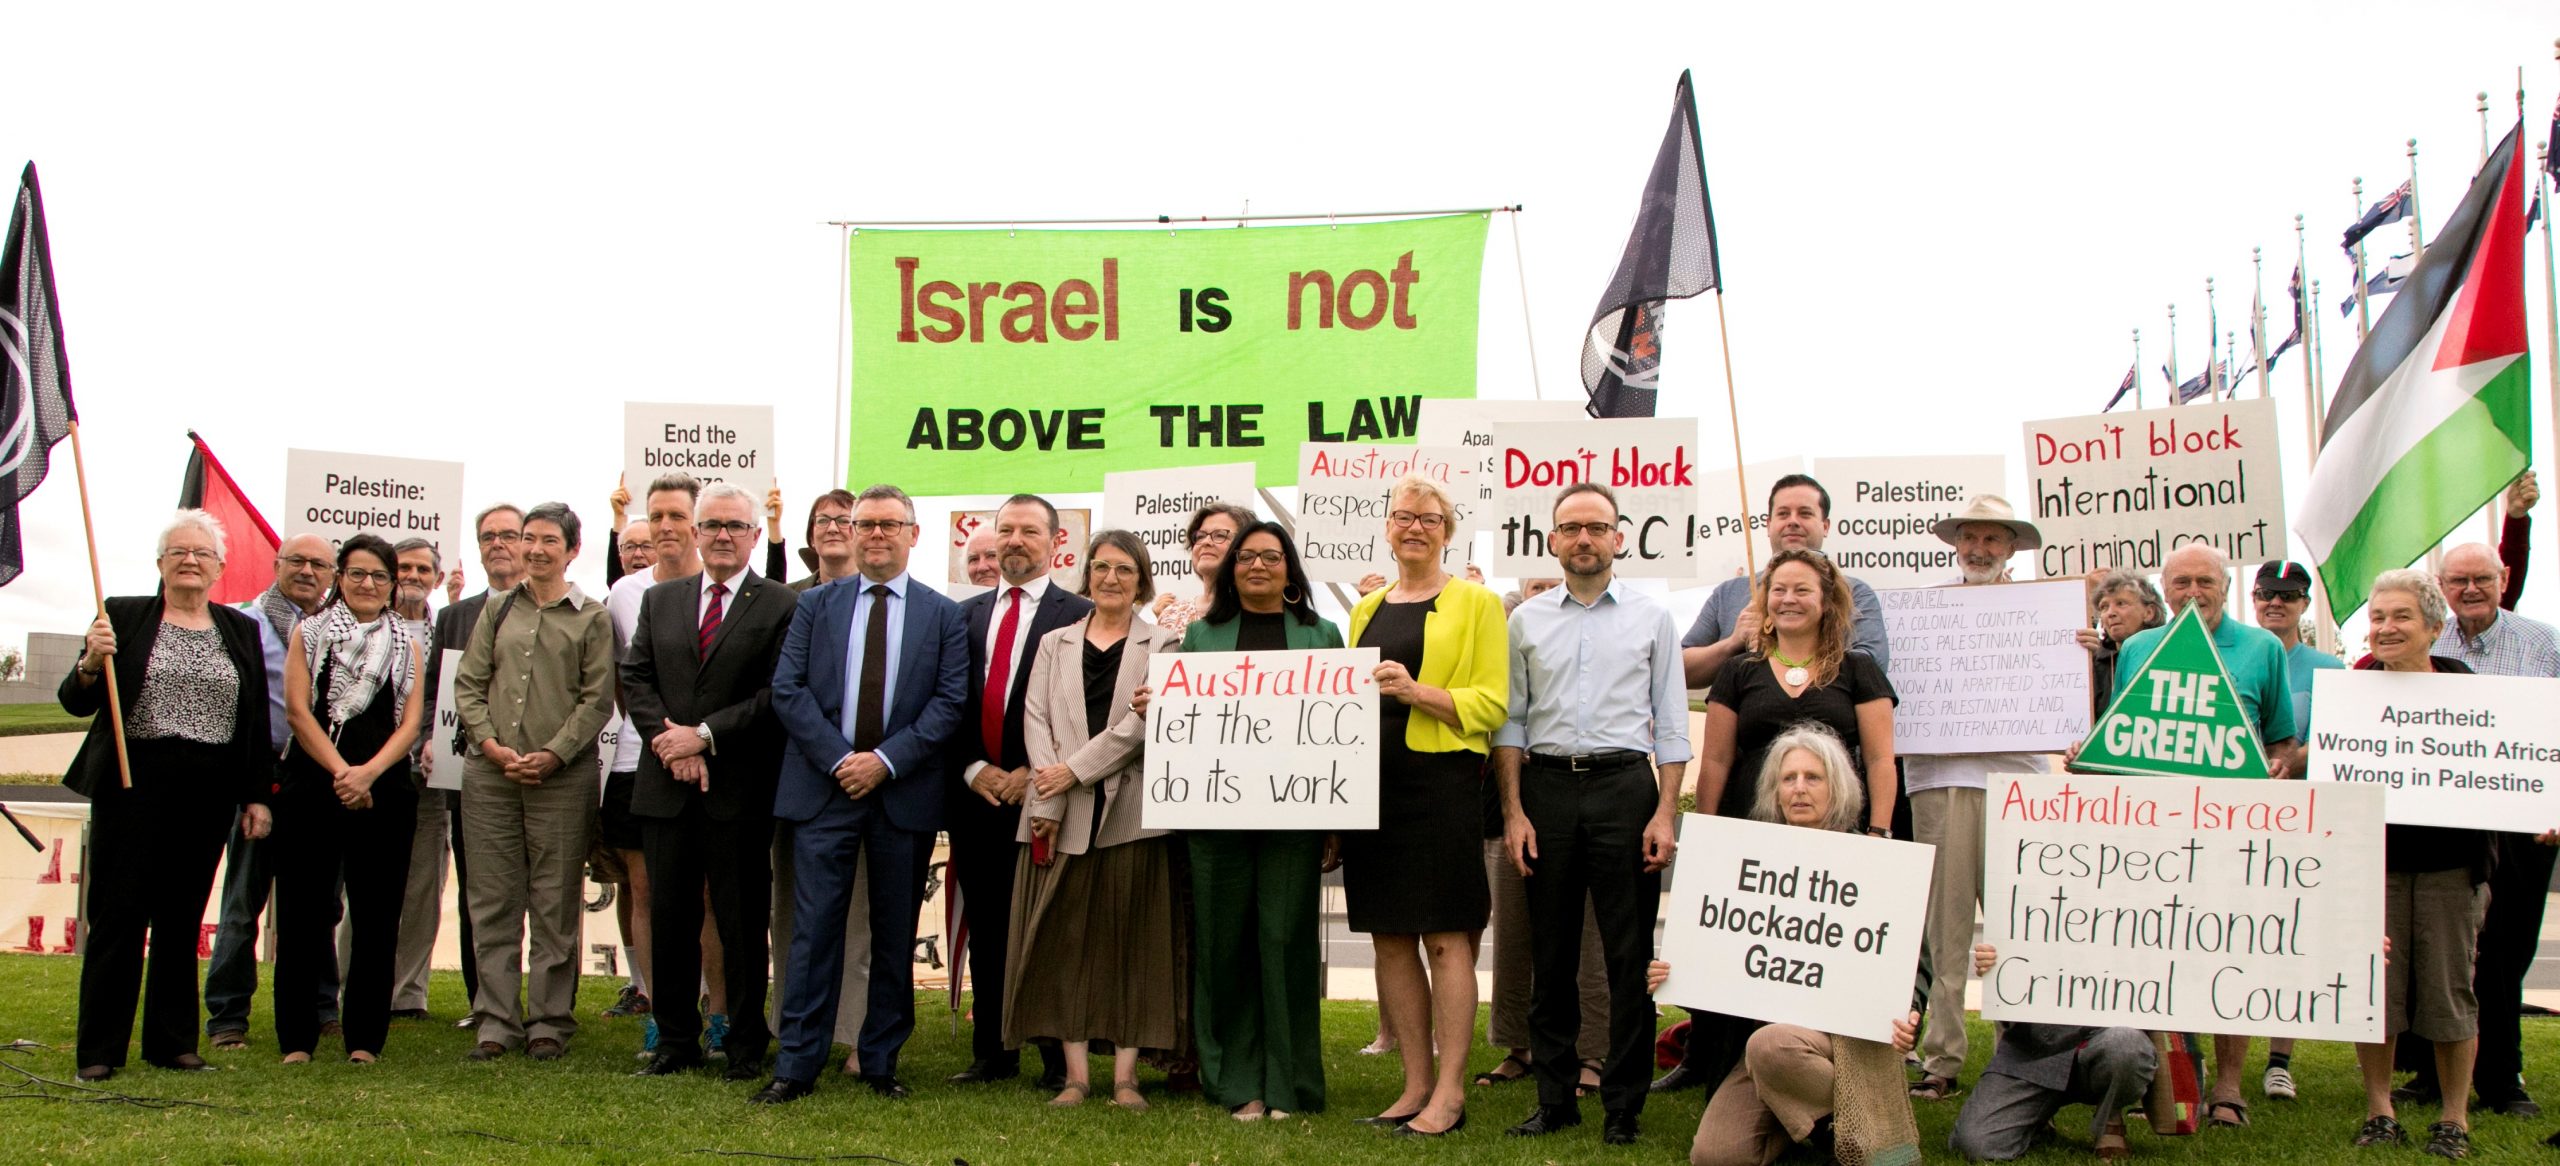 Group outside parliament house with signs "Israel is not above the law"